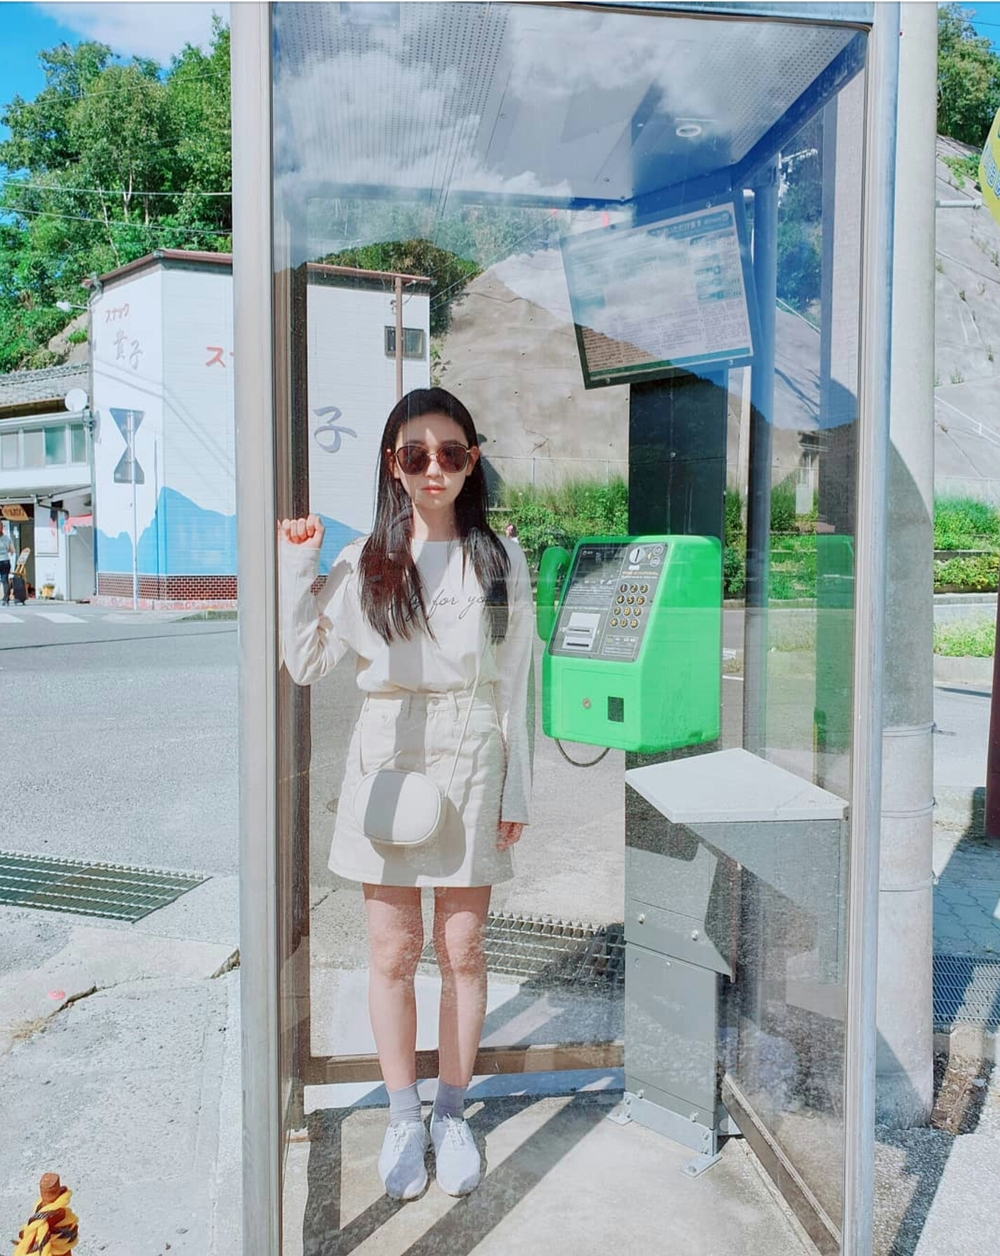 Kim Seul-gi showed off his visuals during the show.Actor Kim Seul-gi posted an article and photo on his Instagram on September 29, Is it right there in 2018?Kim Seul-gi, in the open photo, is inside the Payphone box and has a retro atmosphere; while still a student, beauty steals her gaze.kim ye-eun